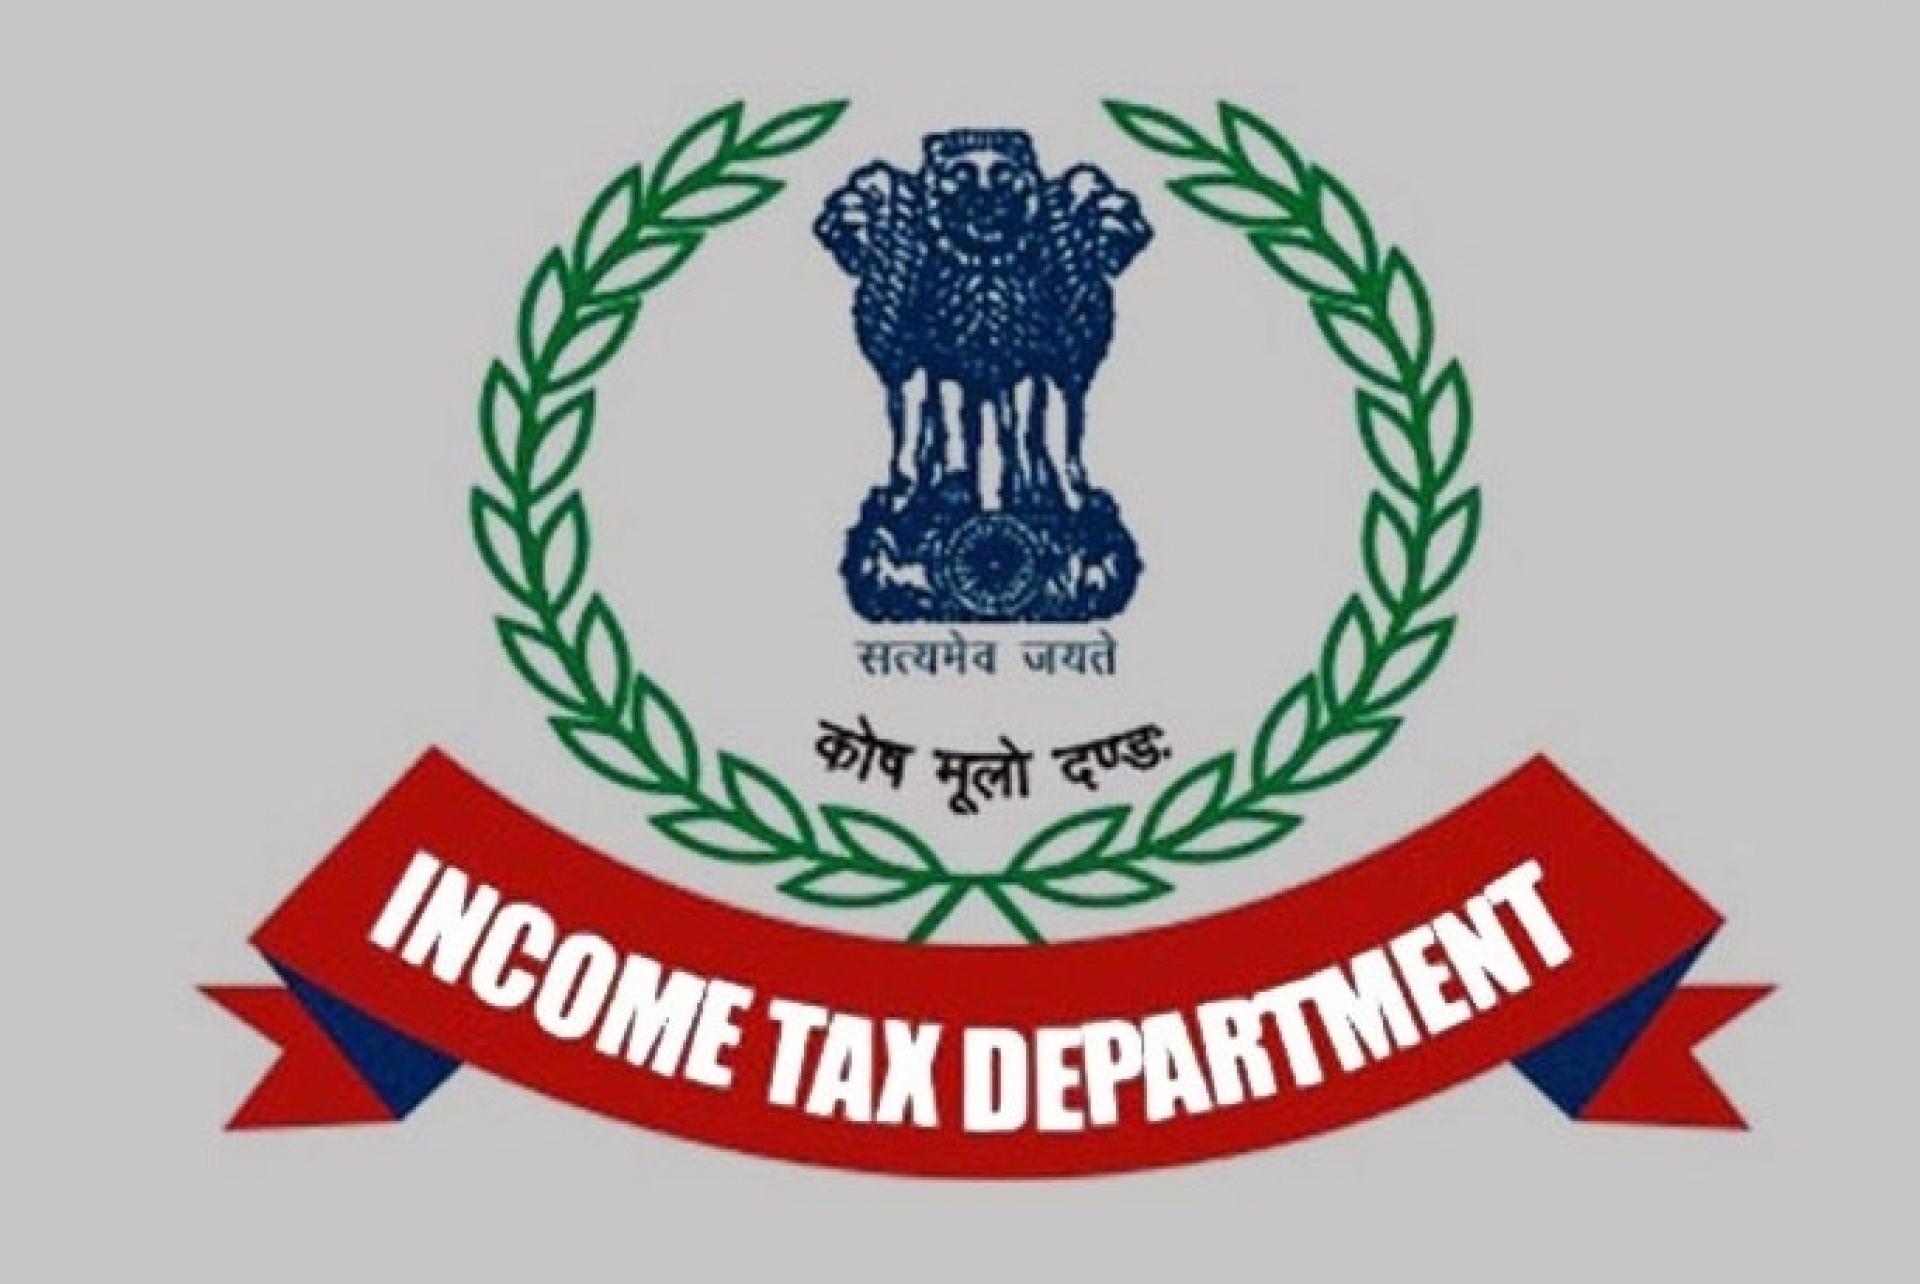 Taxing Times: Faceless Assessment Welcome, Simplification Also Needed